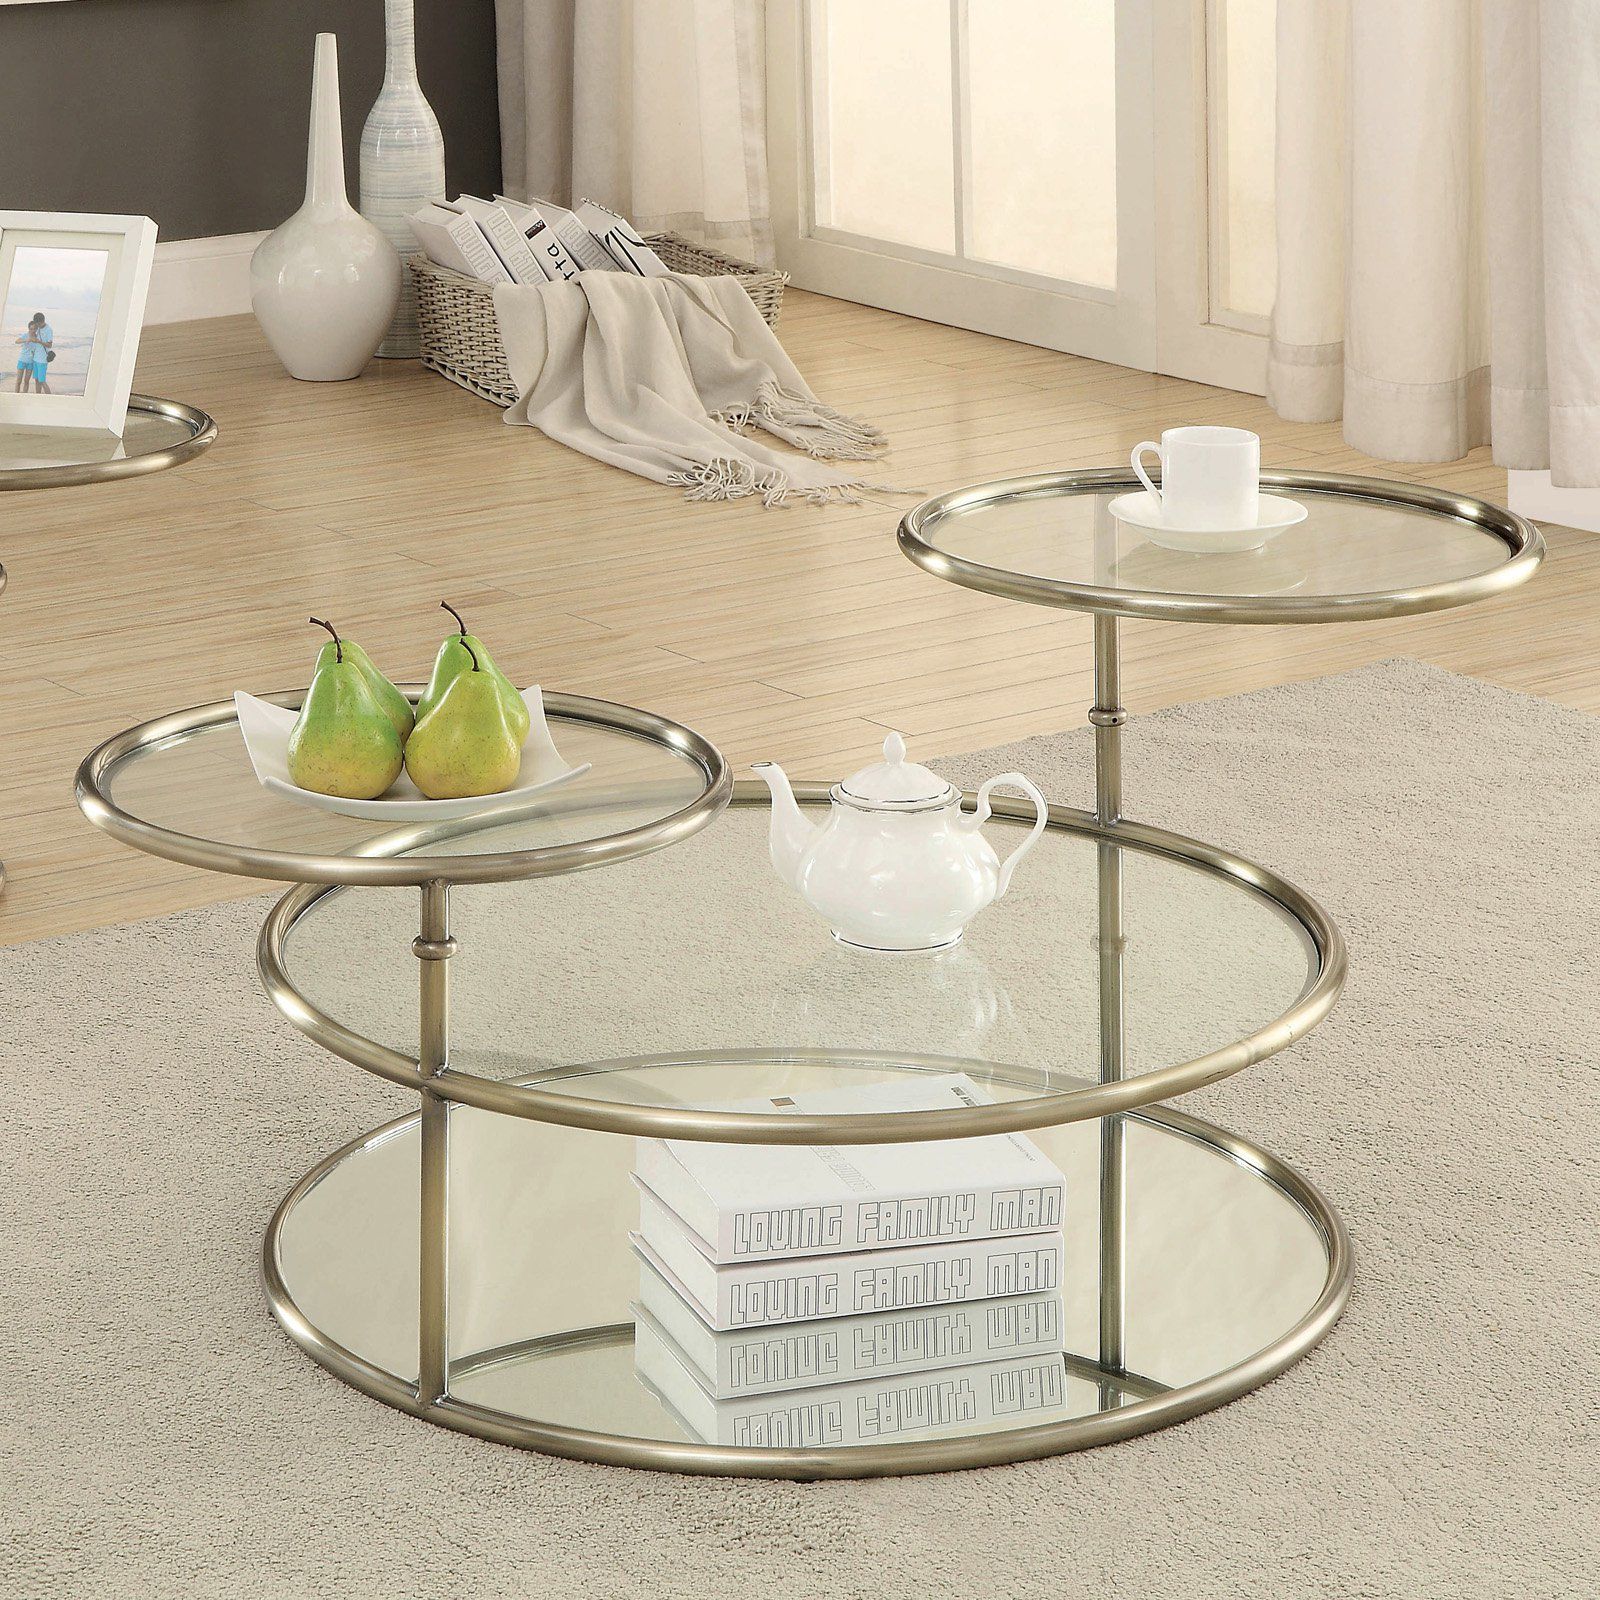 Furniture Of America Leanal Modern Round Swivel Coffee Table – Walmart Throughout Swivel Coffee Tables (View 16 of 20)